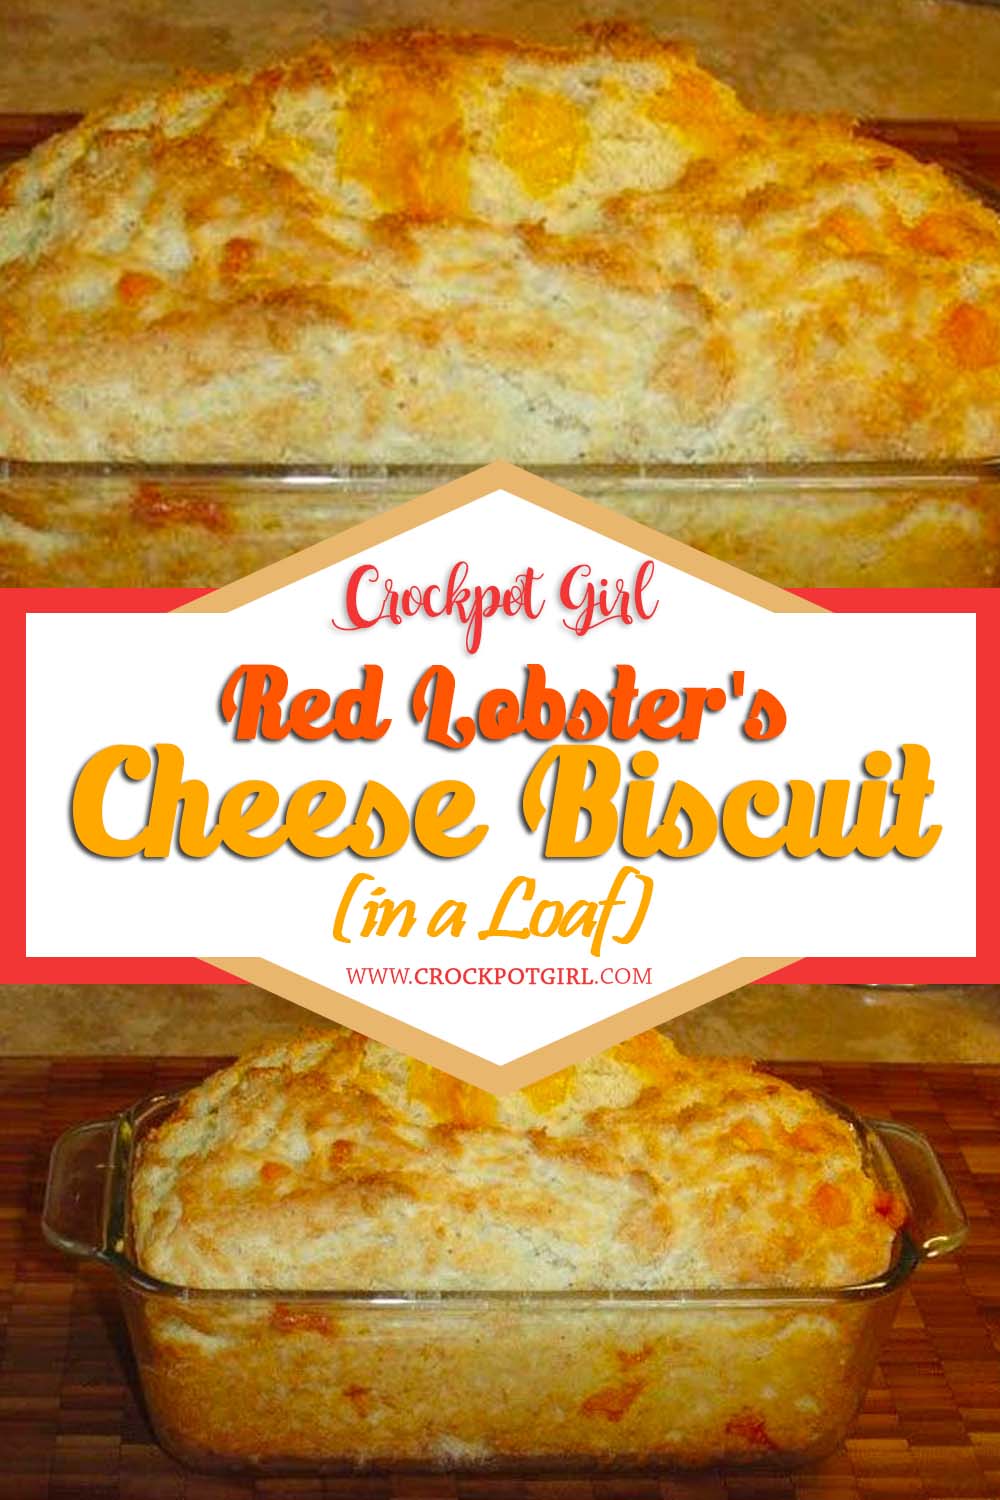 Cheese Biscuit in a Loaf Recipe